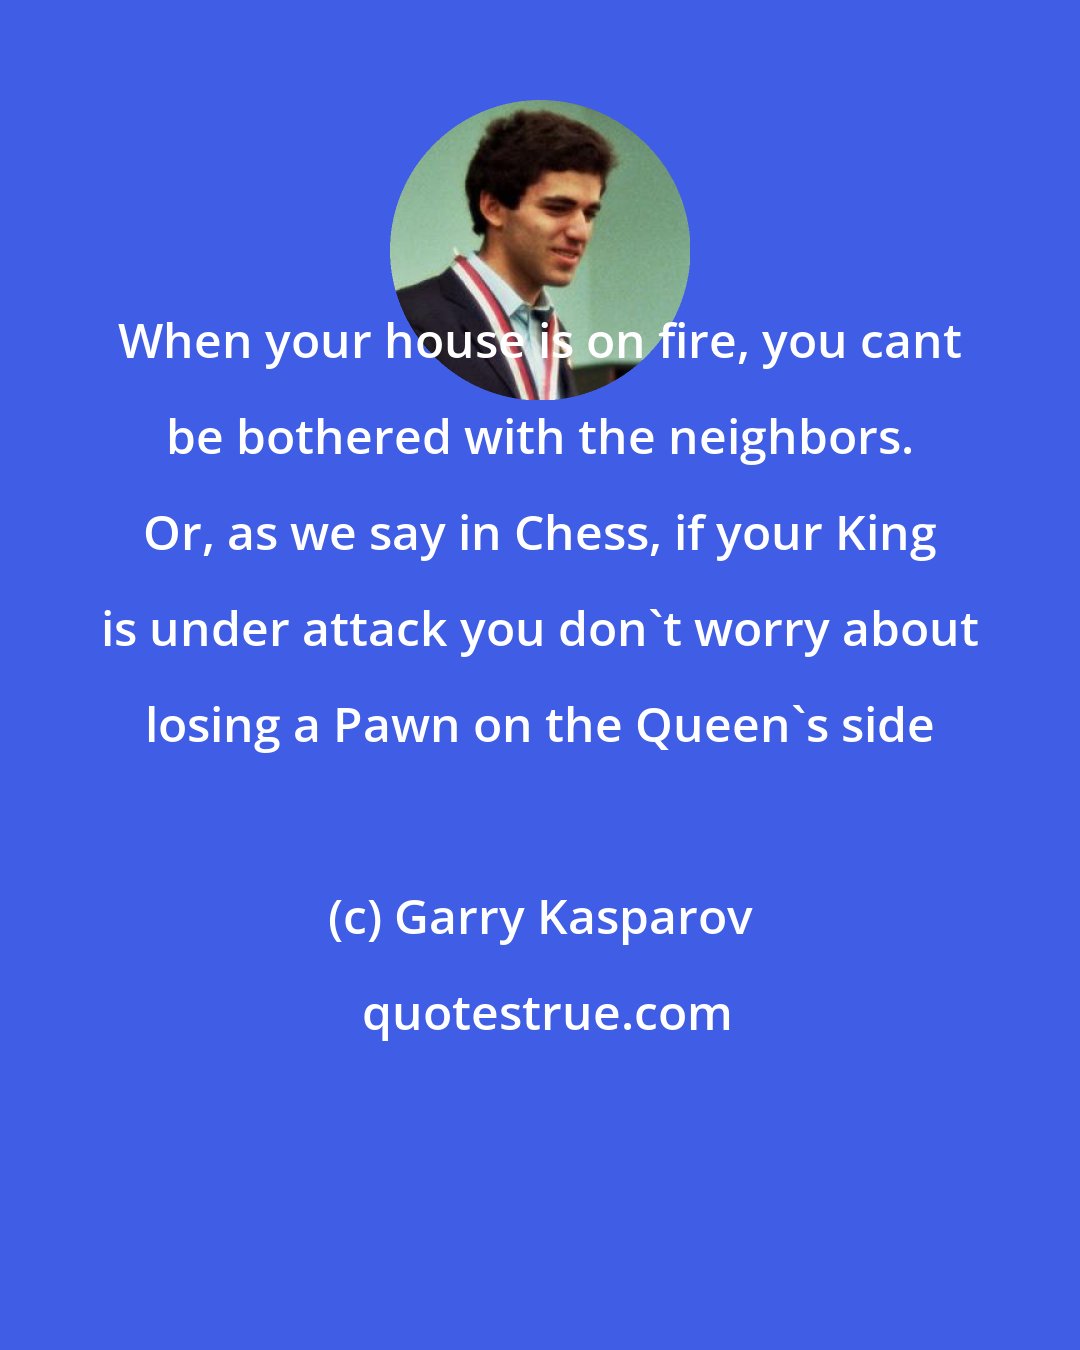 Garry Kasparov: When your house is on fire, you cant be bothered with the neighbors. Or, as we say in Chess, if your King is under attack you don't worry about losing a Pawn on the Queen's side